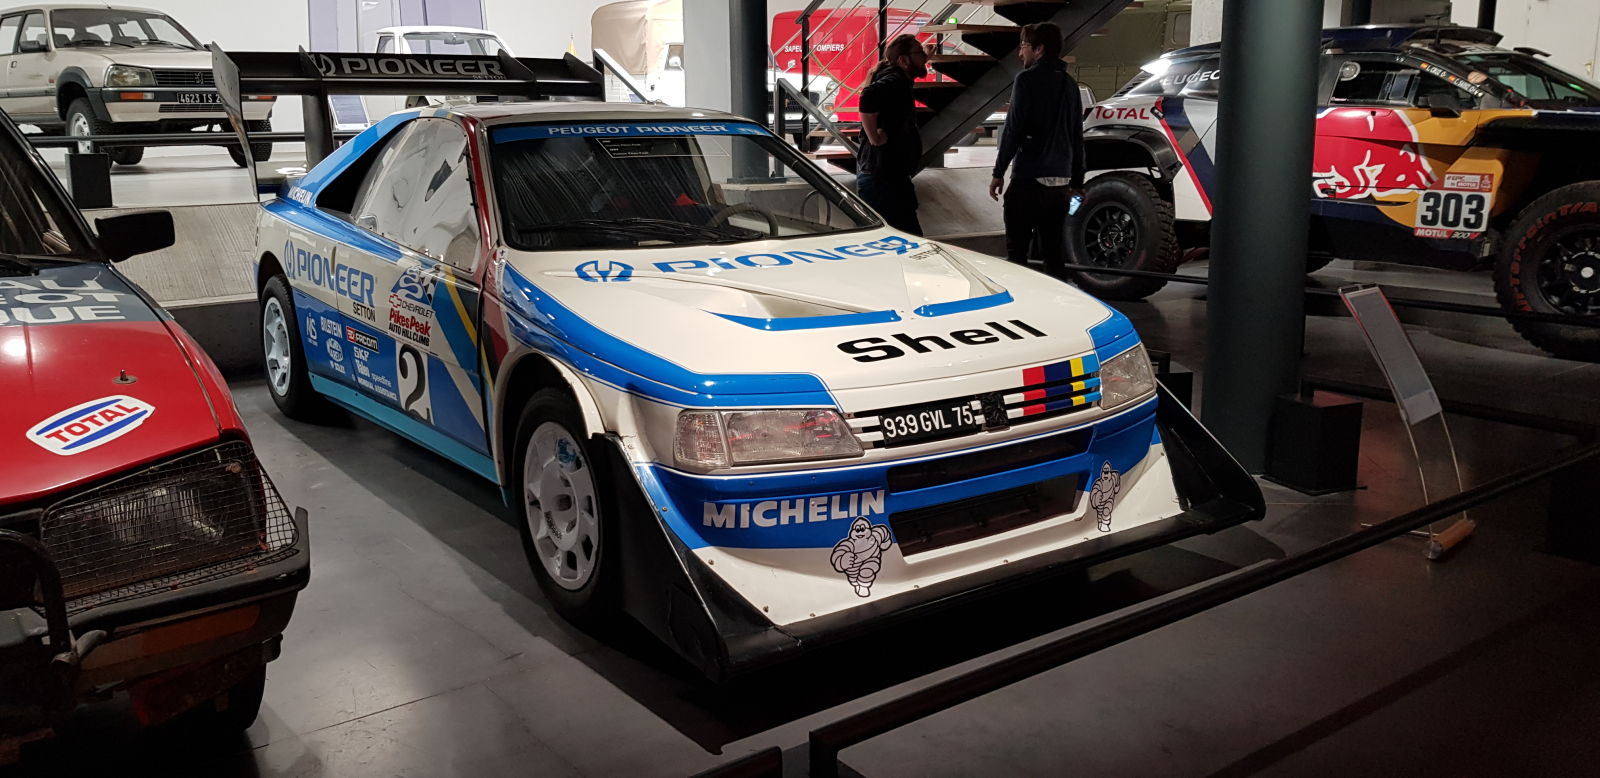 Peugeot Museum Sochaux. We definitely spent the most time in the motorsport section drooling